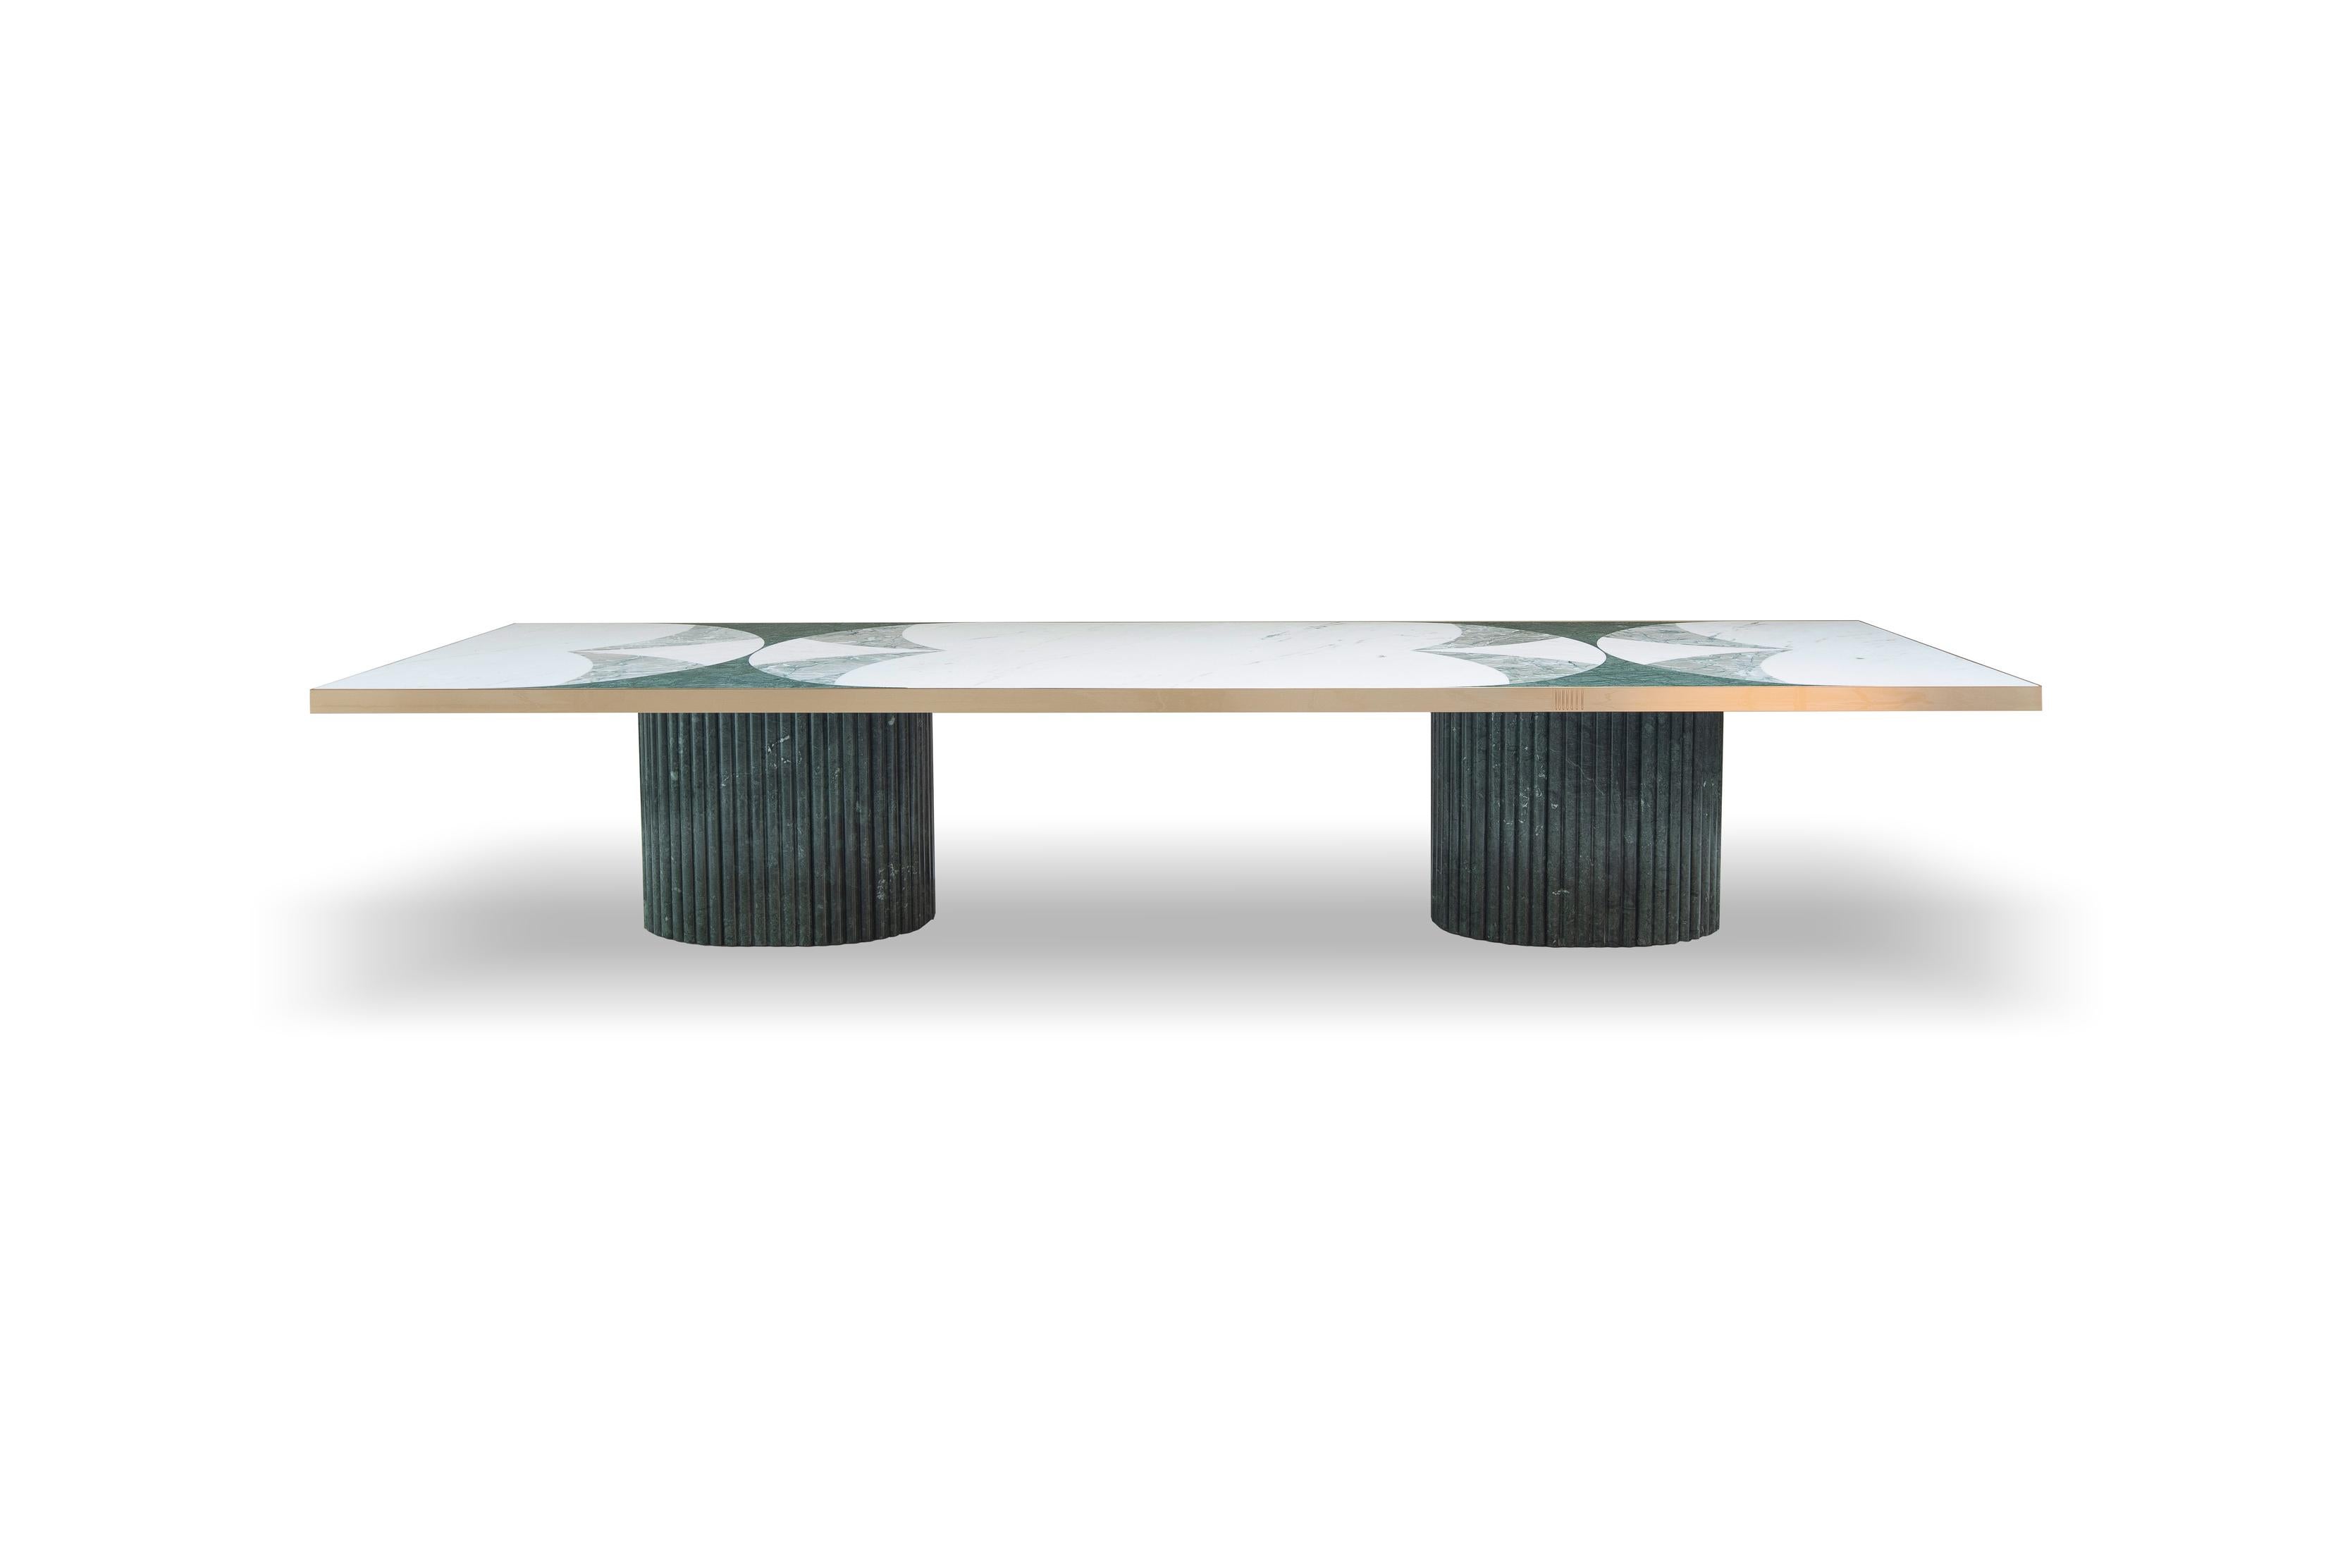 Biloba Dining Table, Contemporary Collection, Handcrafted in Portugal - Europe by Greenapple.

Designed by Rute Martins for the Contemporary Collection, Biloba takes inspiration from nature to luxury by combining the unique shape of the Ginkgo